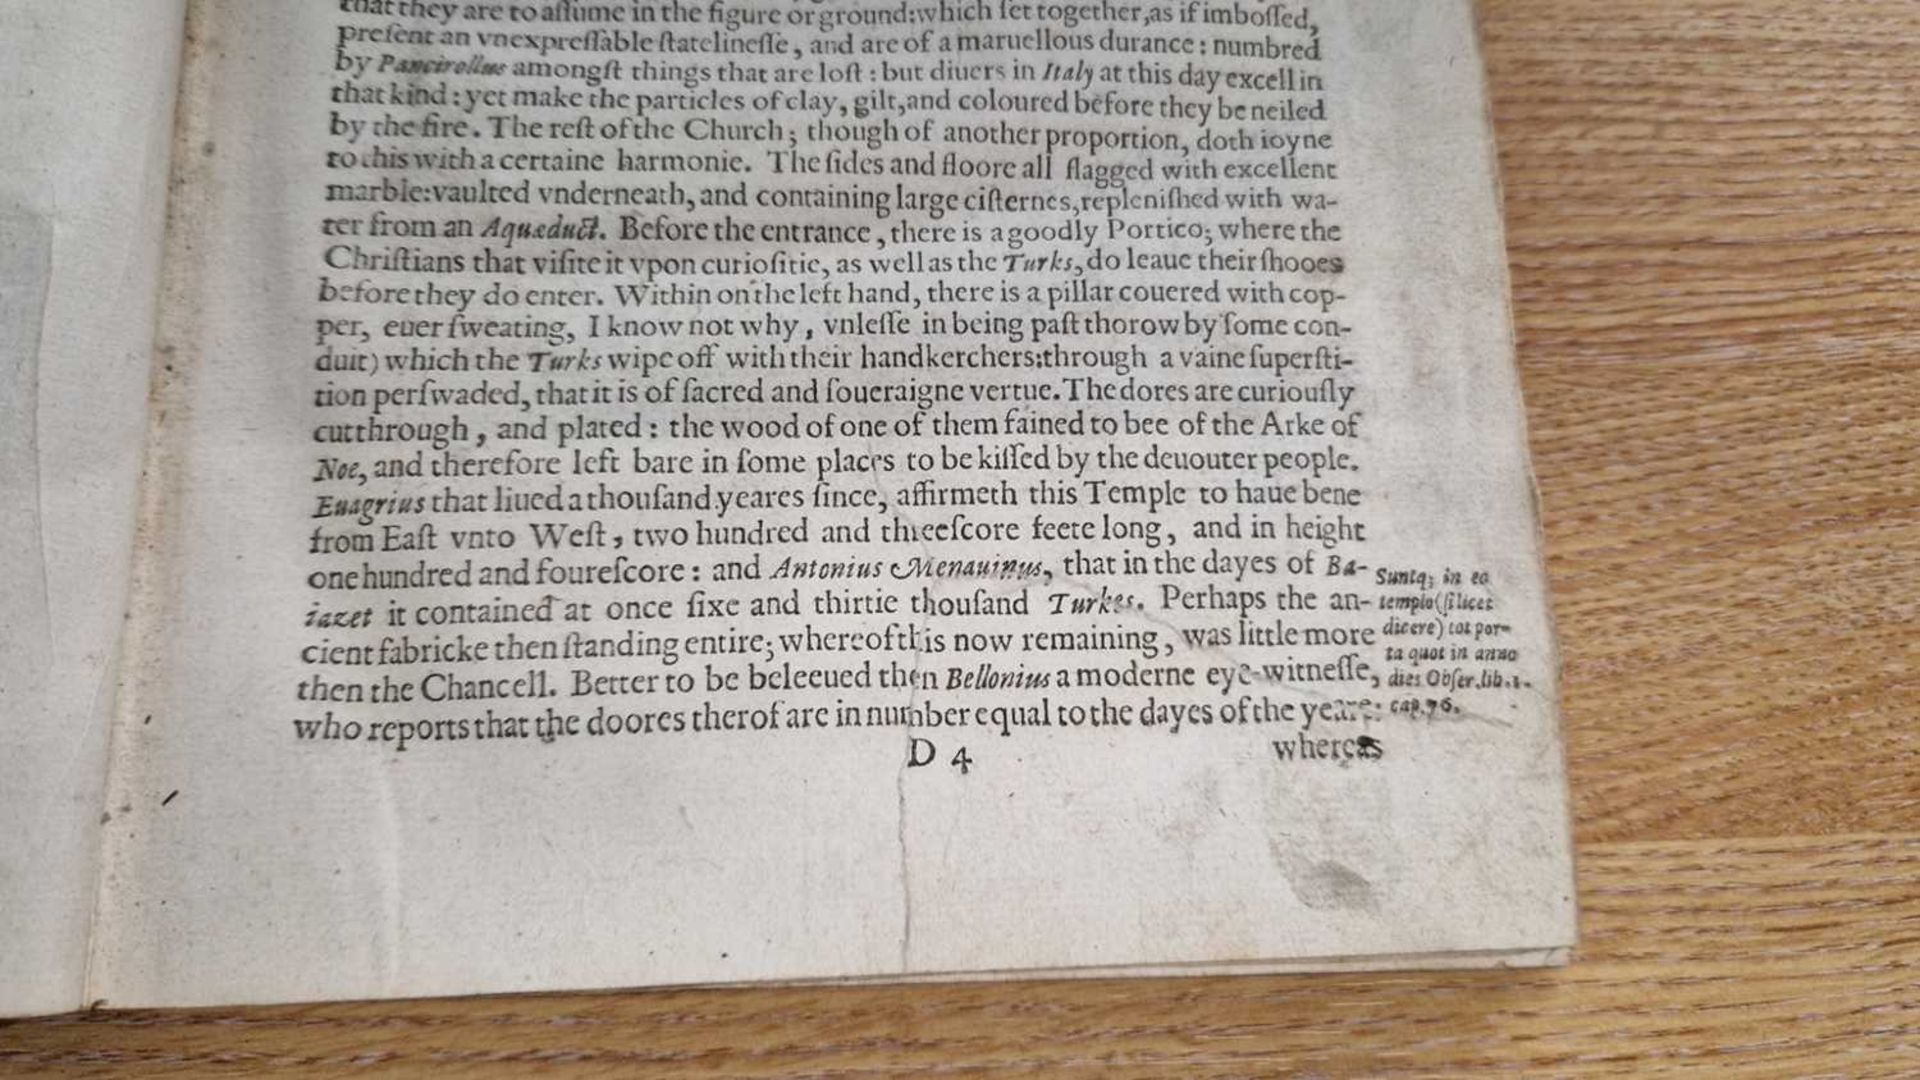 Sandys, George; A Relation Of A Journey Begun An Dom 1610, printed London for Ro. Alott 1632, with - Image 11 of 31